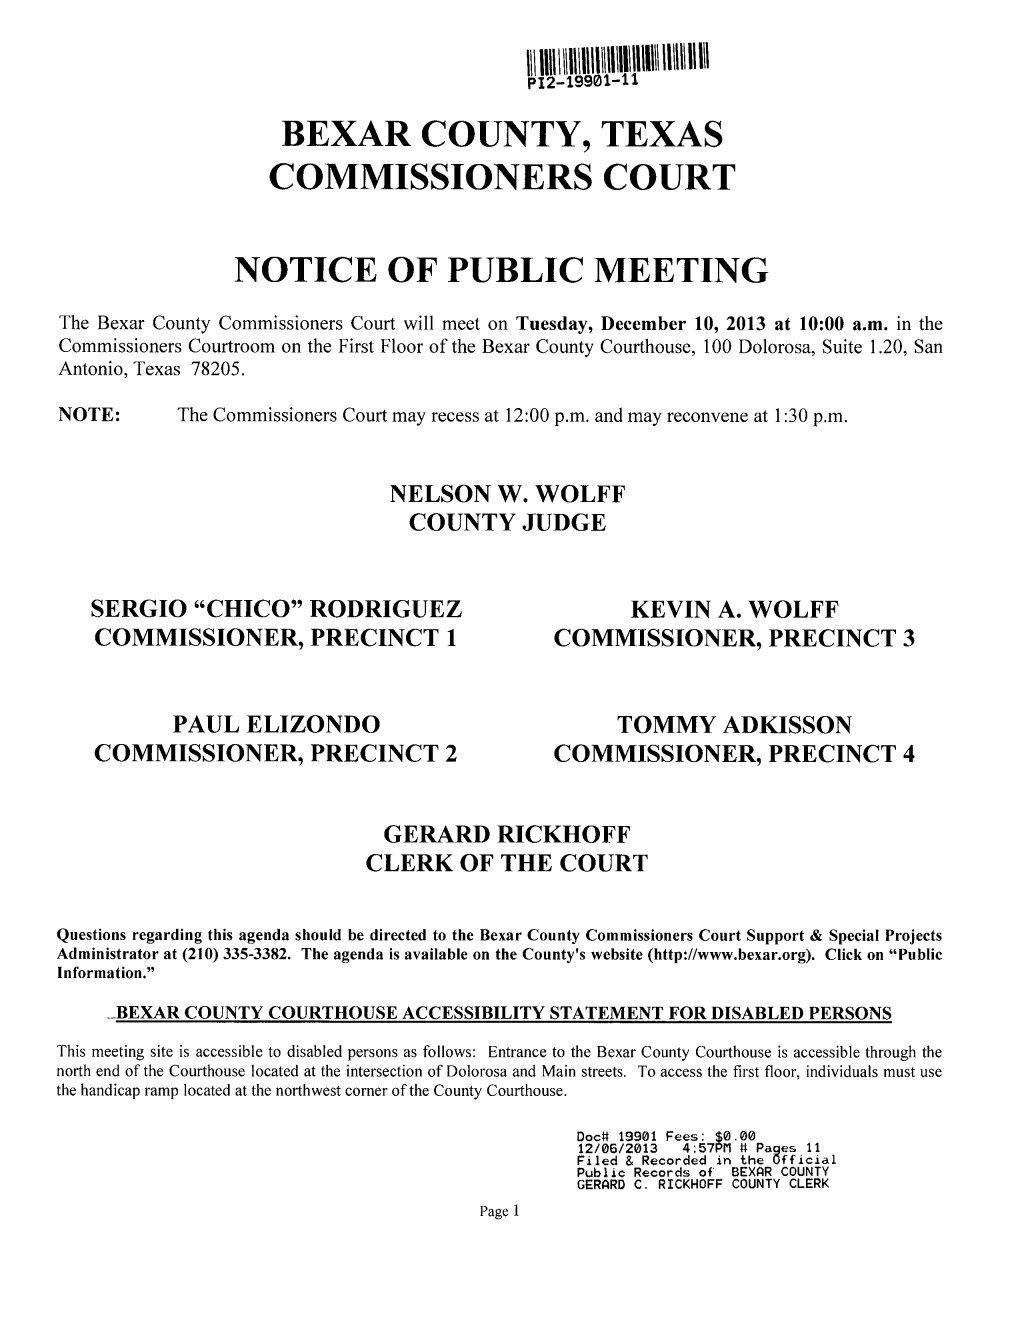 Bexar County, Texas Commissioners Court